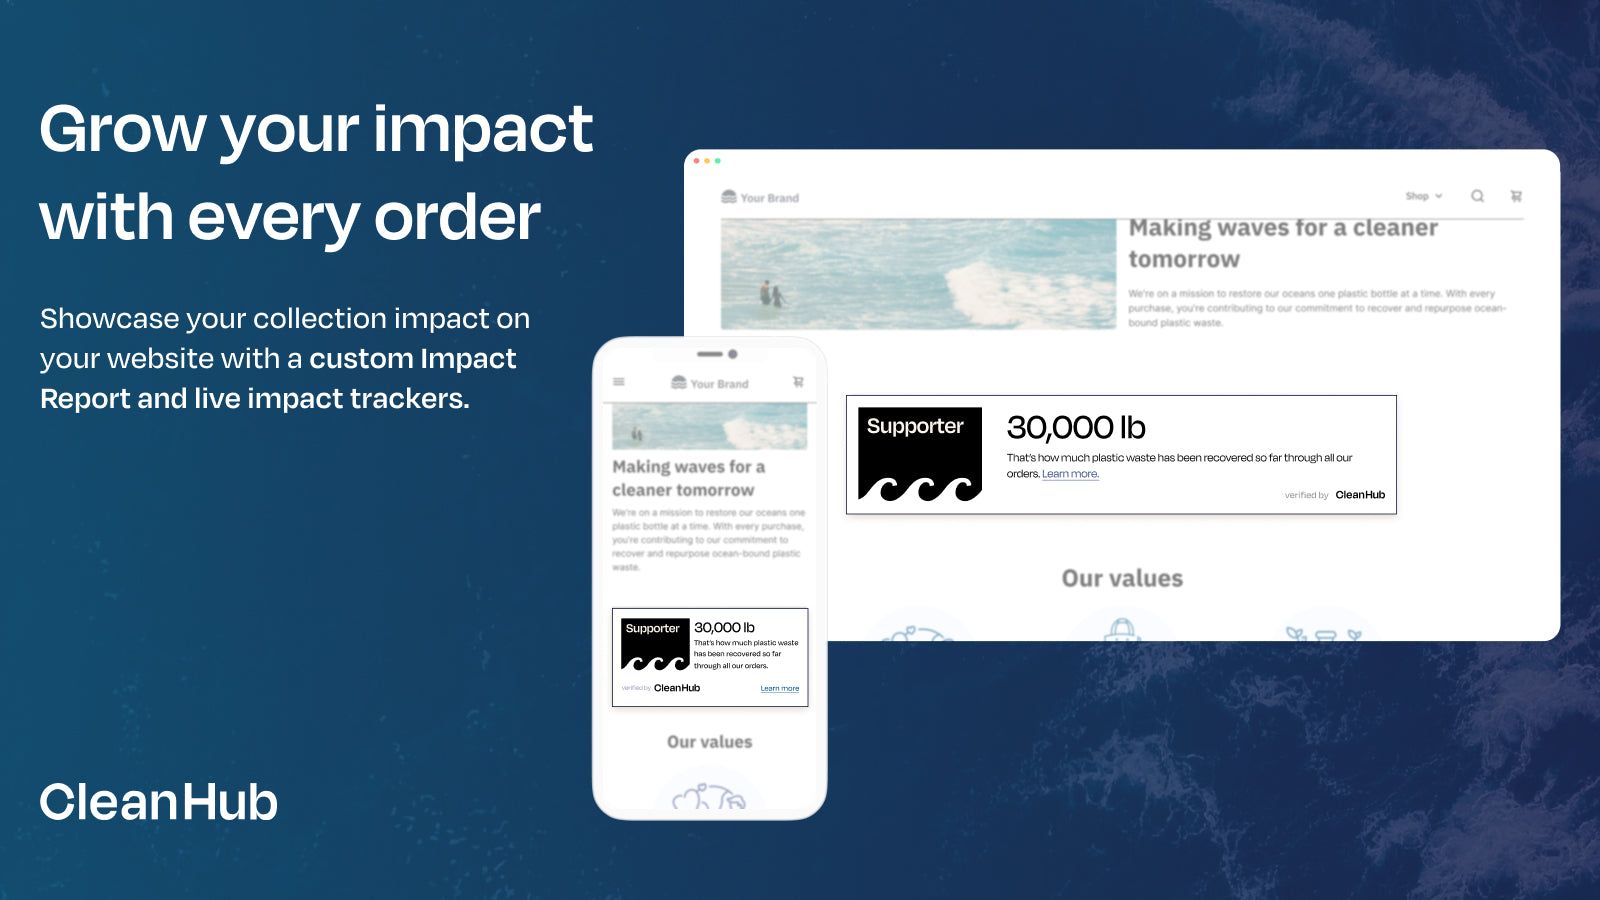 Track and share your impact